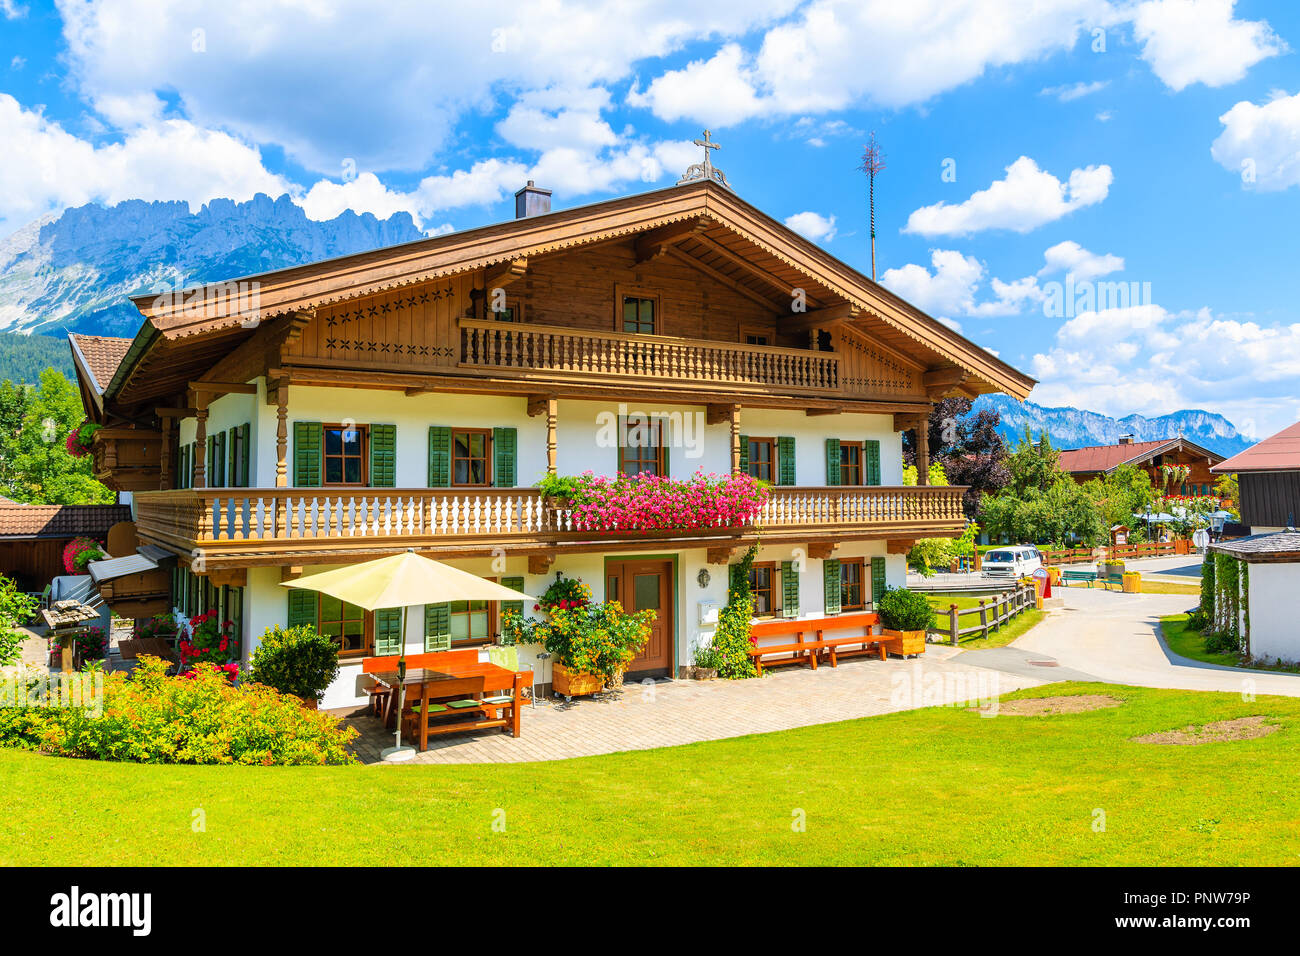 Typical wooden alpine house decorated with flowers on green meadow in Going am Wilden Kaiser village on sunny summer day, Tyrol, Austria Stock Photo